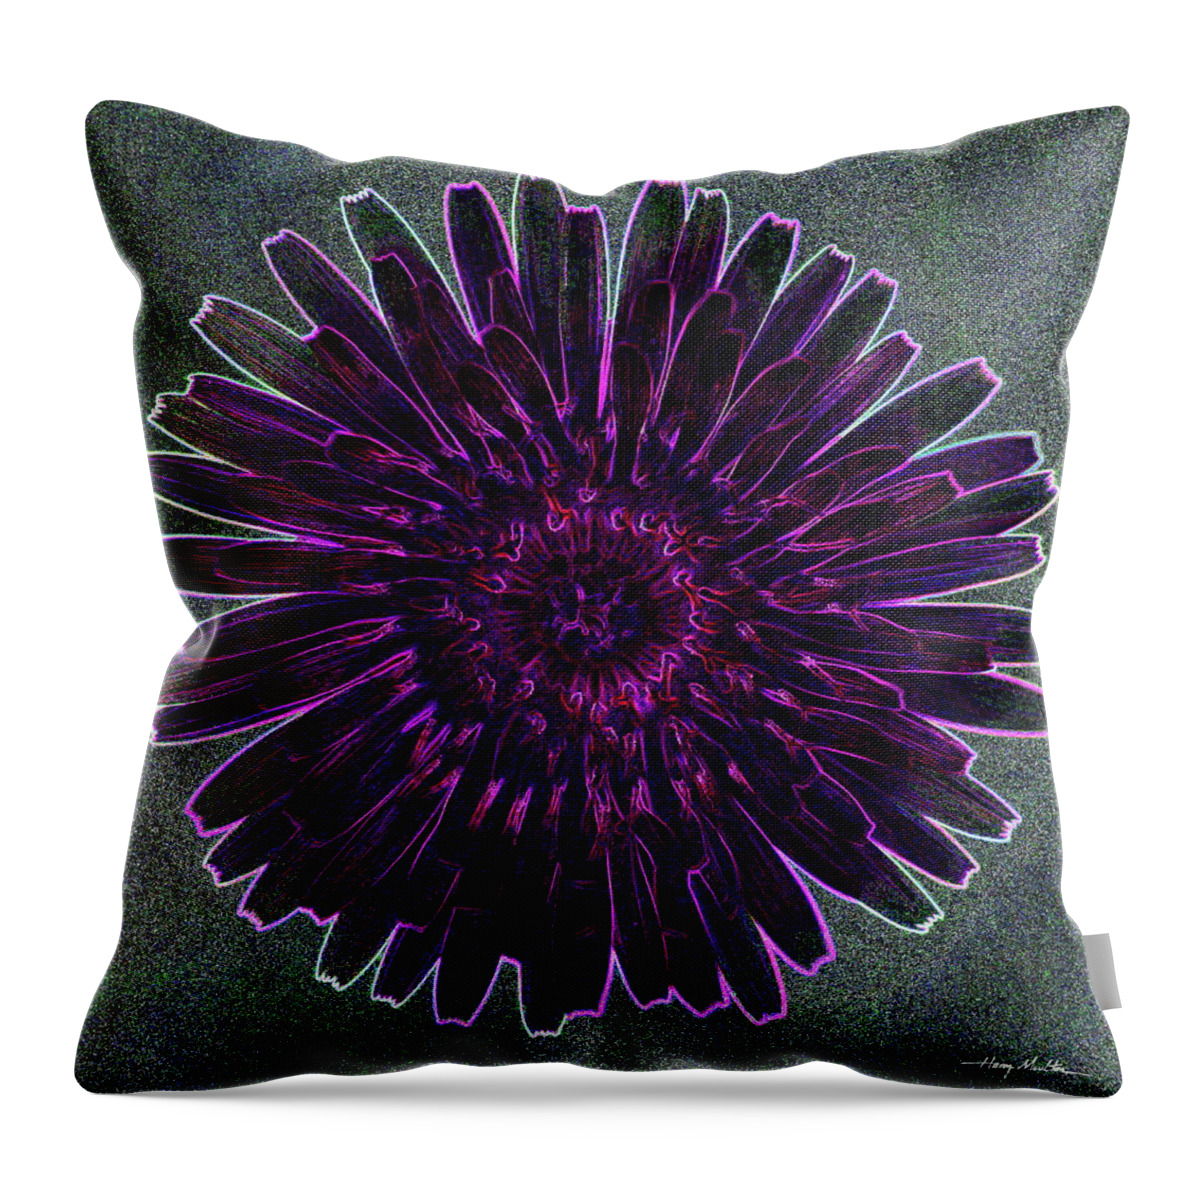 Flower Throw Pillow featuring the pyrography Digital Dandelion by Harry Moulton